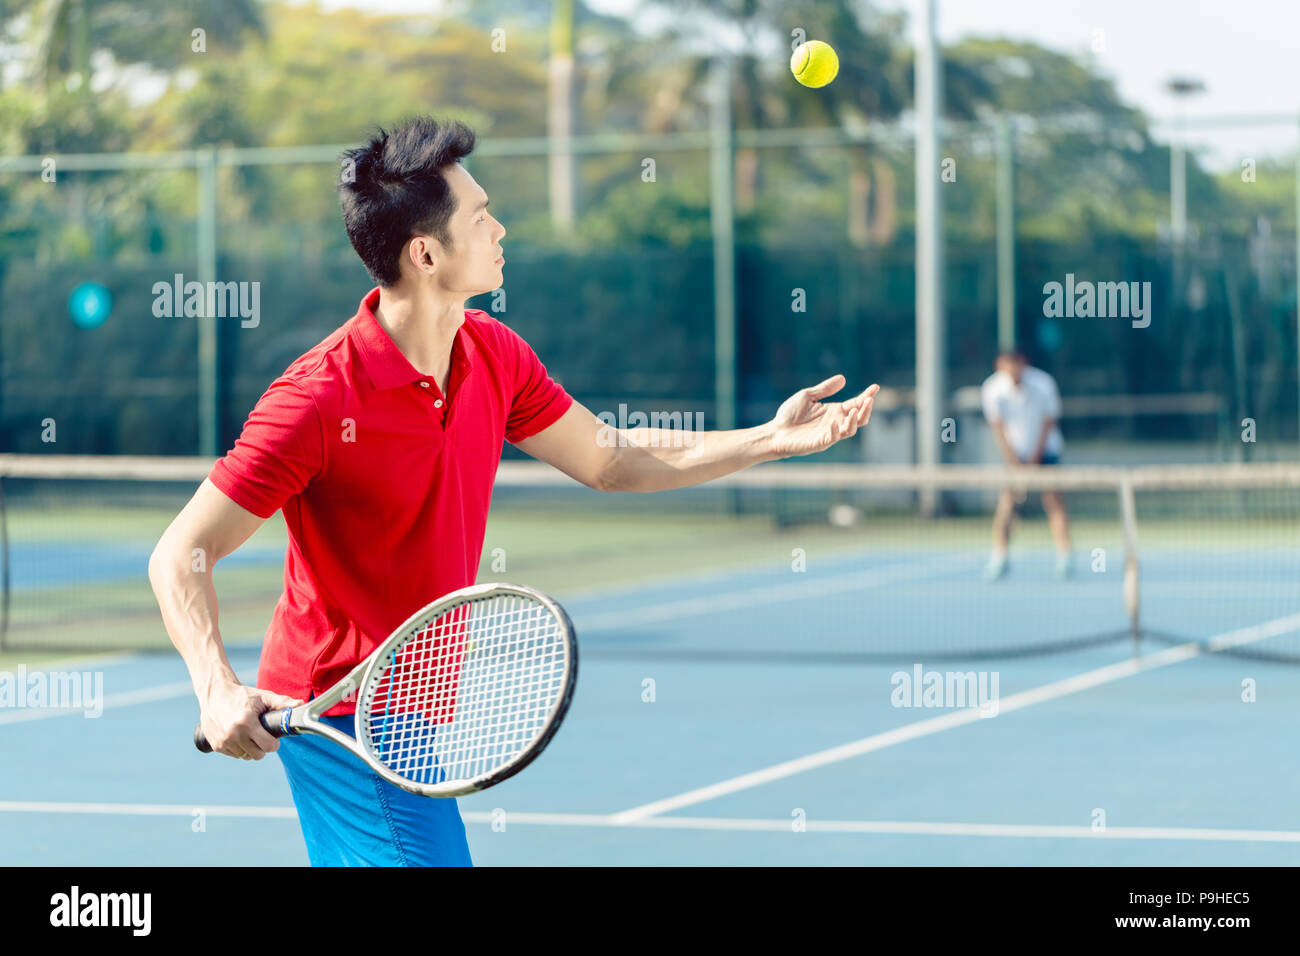 Chinese tennis player ready to hit the ball while serving in a tennis match Stock Photo